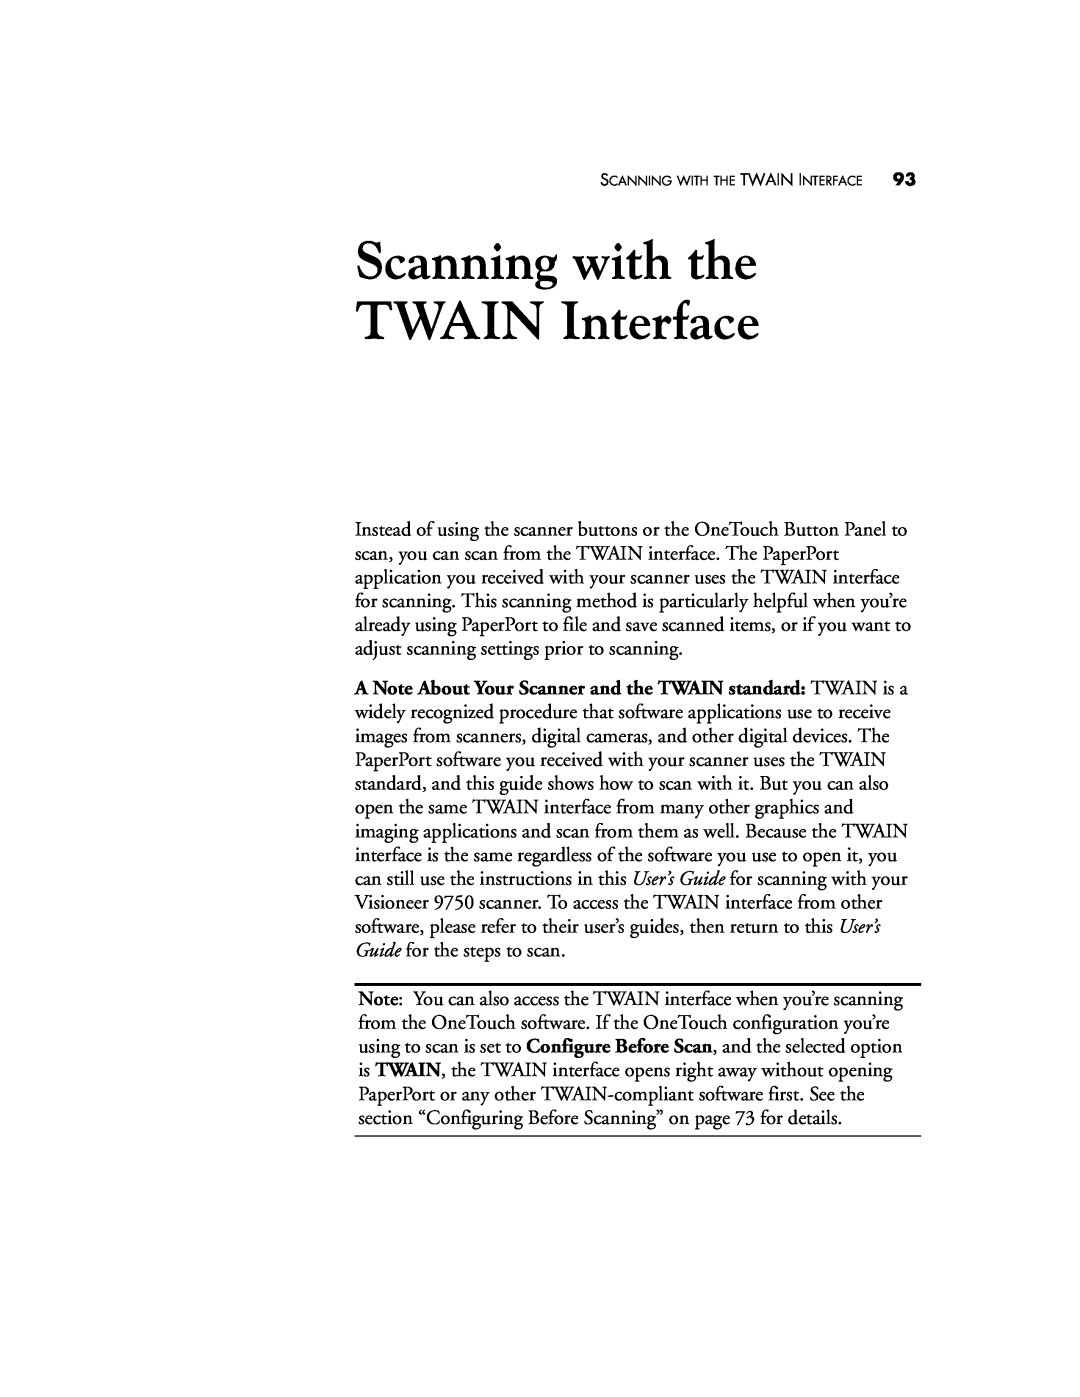 Visioneer 9750 manual Scanning with the TWAIN Interface, Scanning With The Twain Interface 